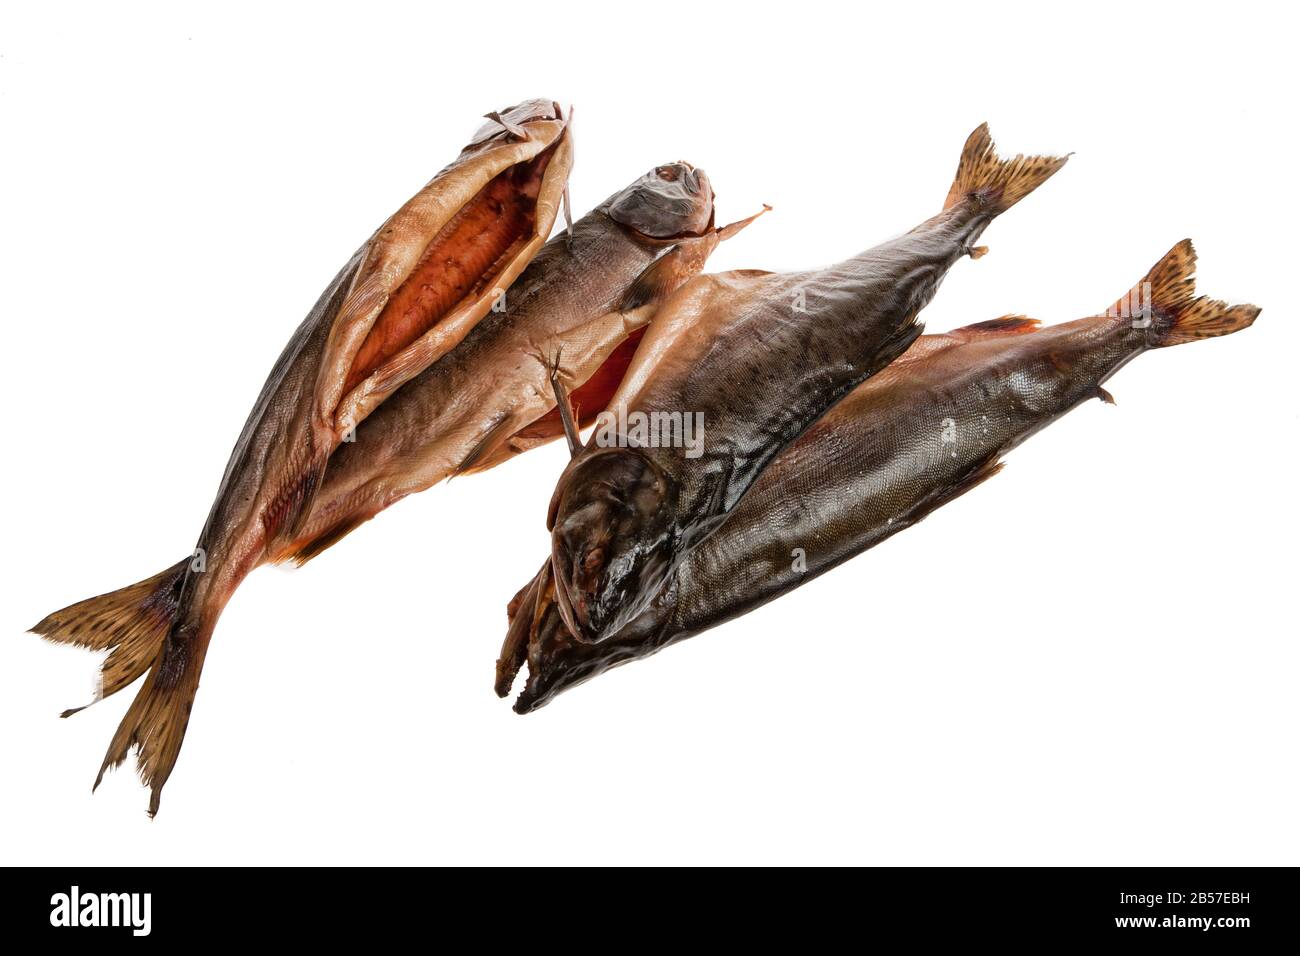 Fish on an isolated studio background Stock Photo